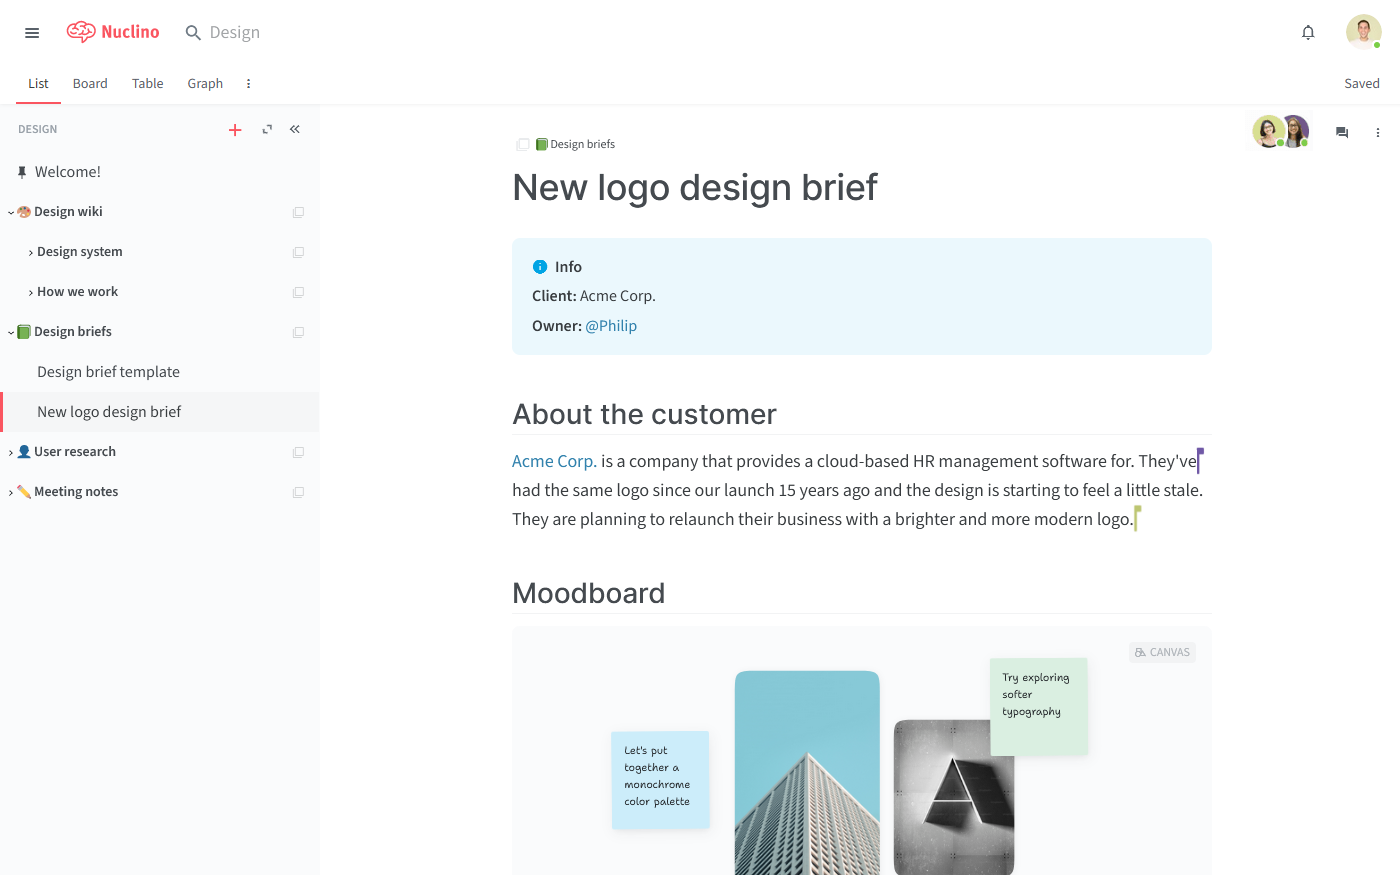 What Is a Design Brief: Templates, Examples & More